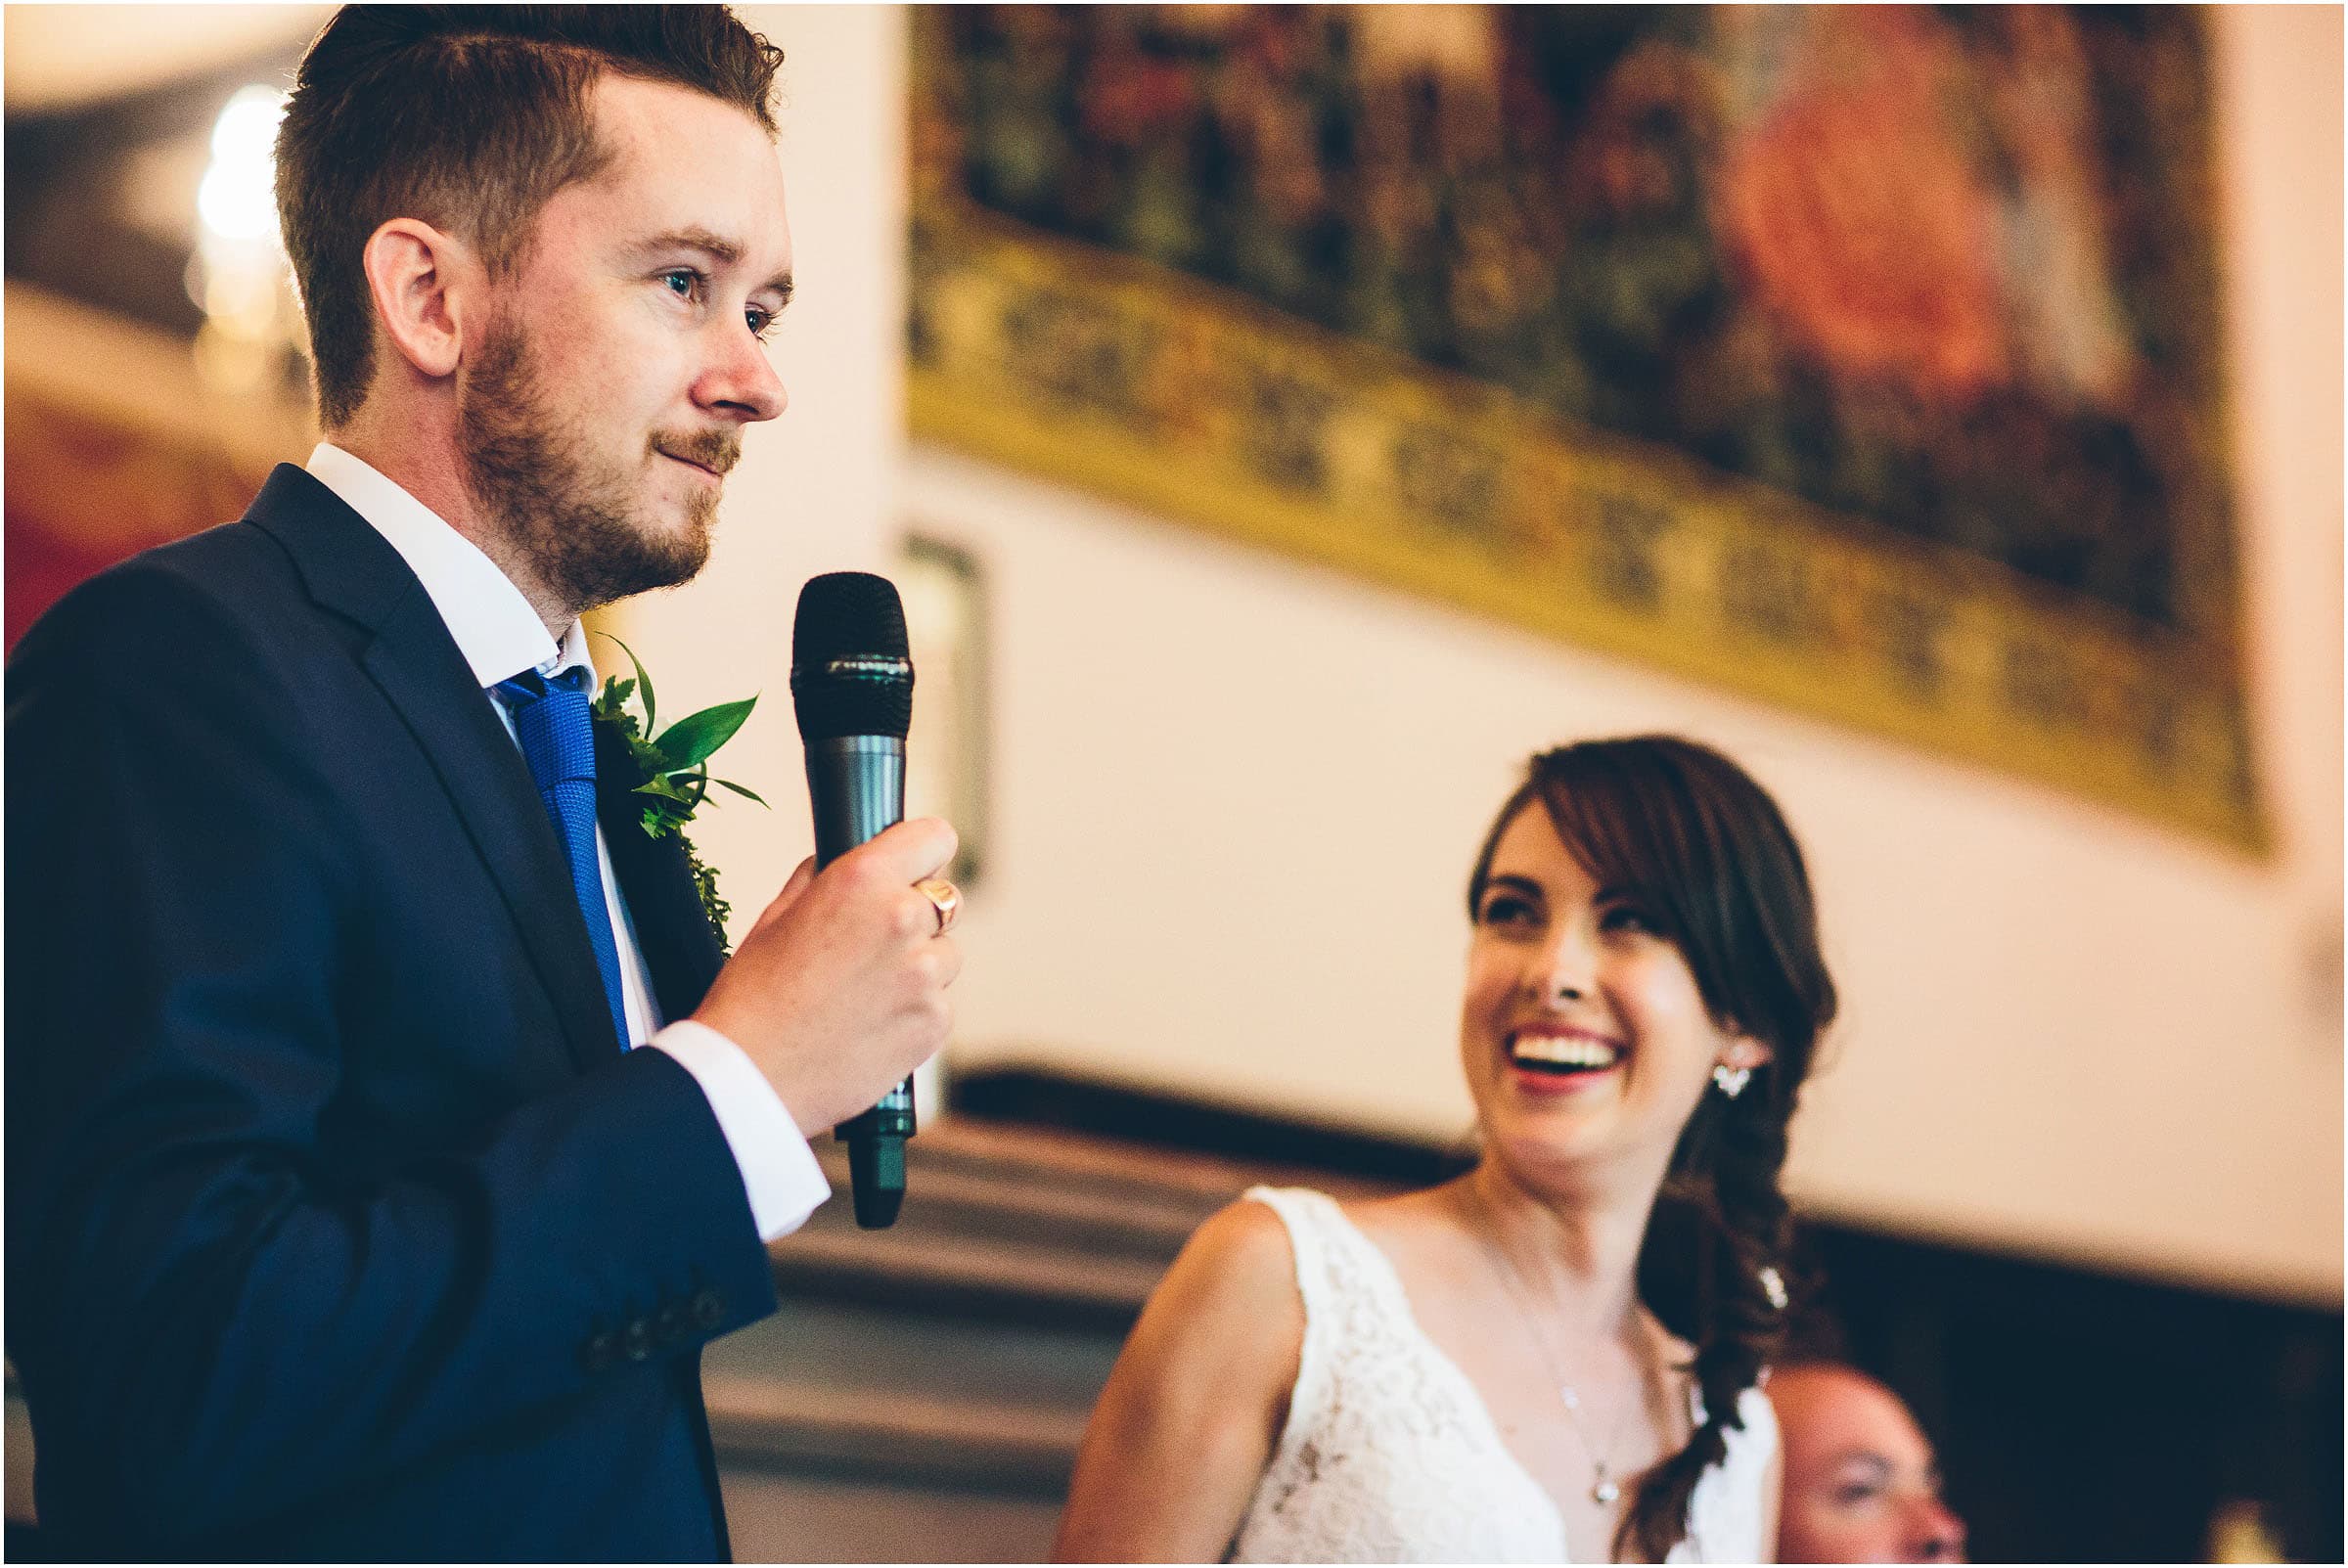 A groom giving his speech in front of a large tapestry at Peckforton Castle while his bride laughs in the background.